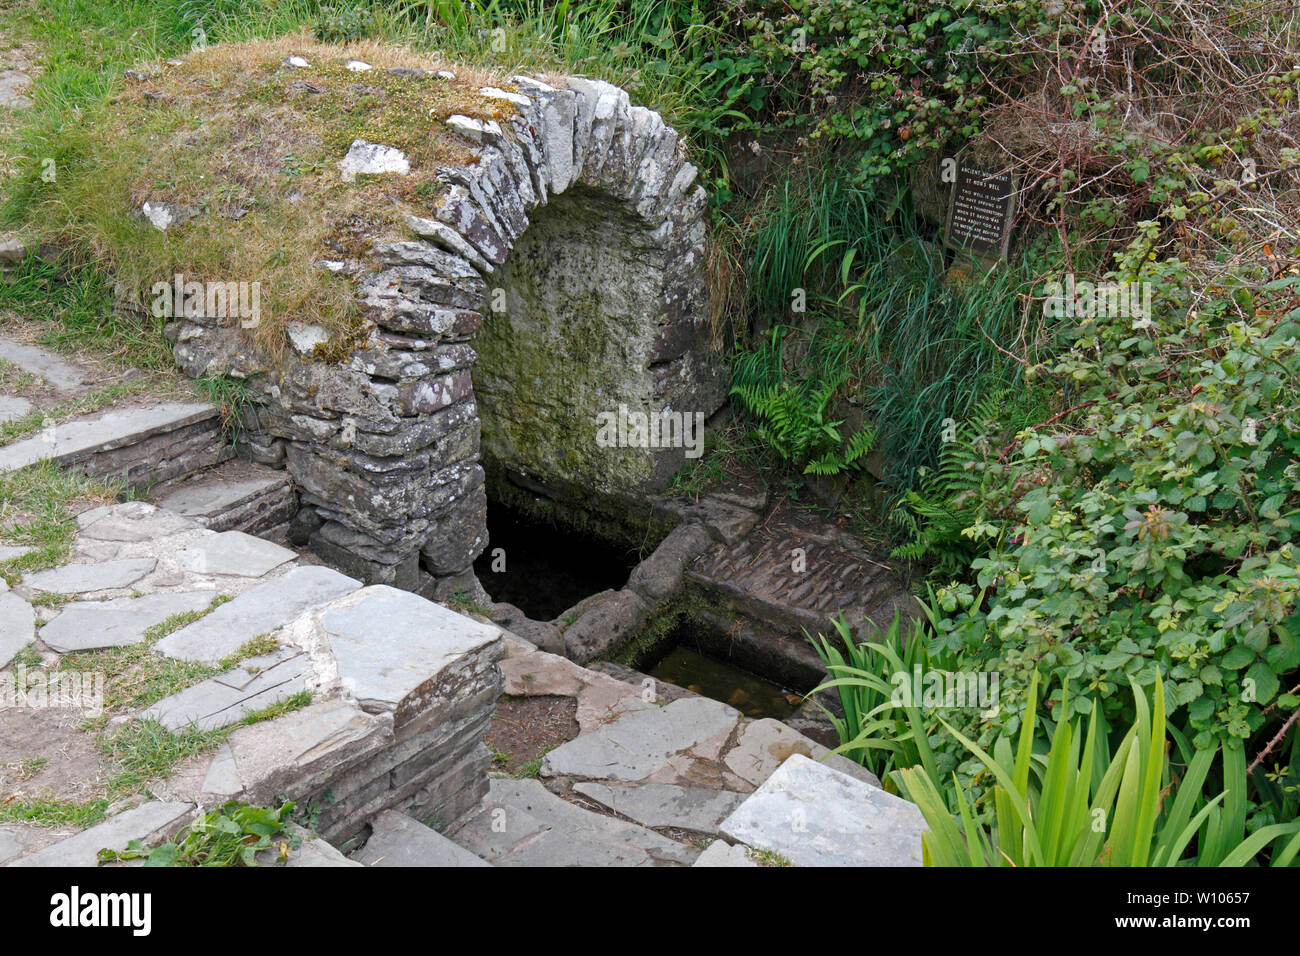 St Non's Well, Pembroekshire, West Wales, UK. Religious site. Stock Photo